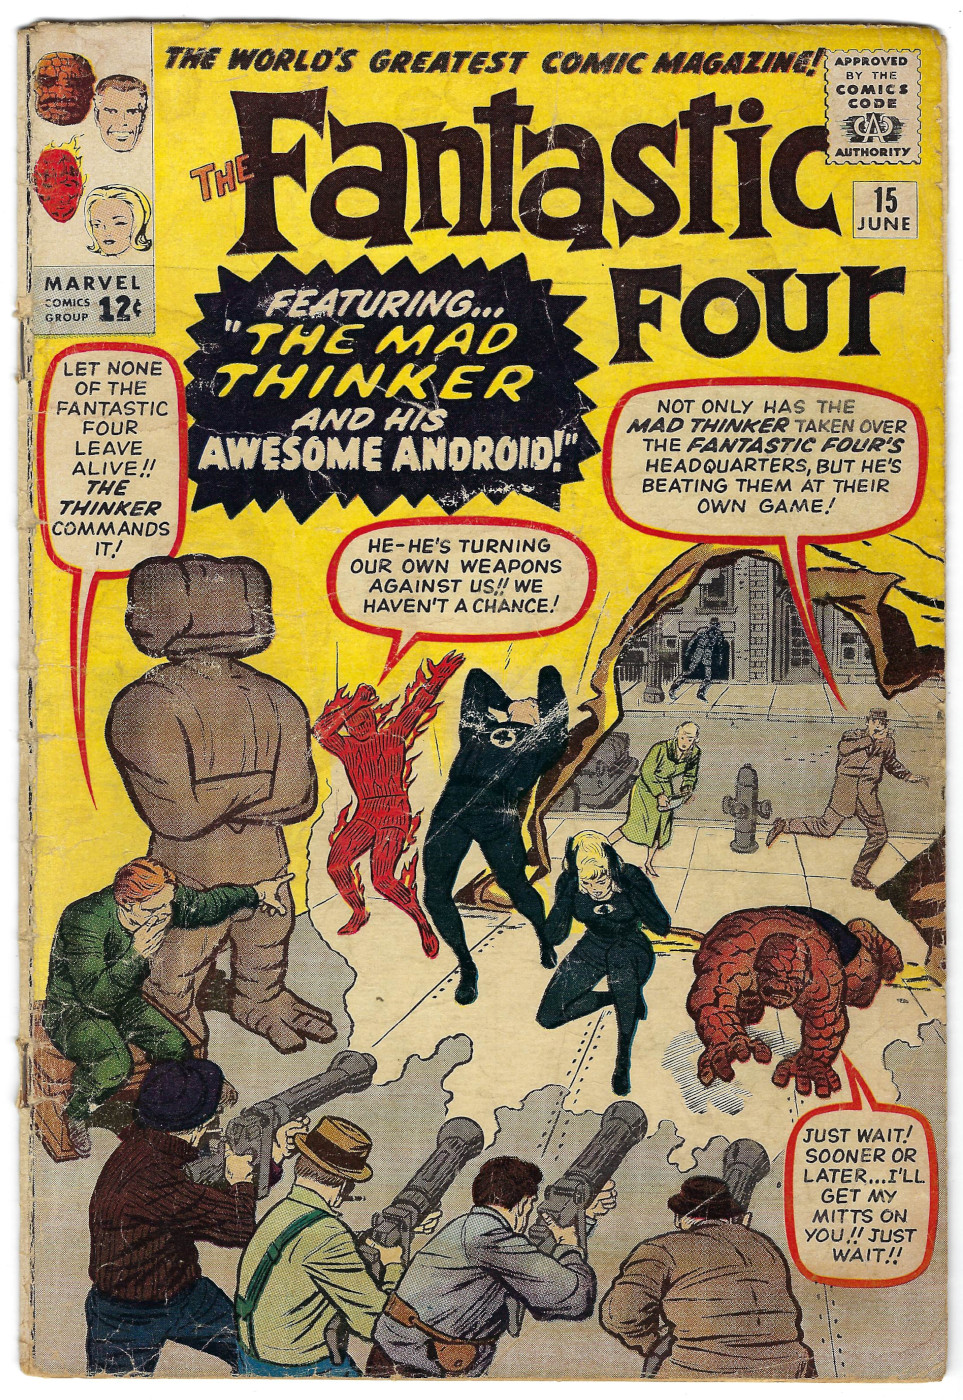 Marvel Comics Fantastic Four (1961) #15: 1st Appearance of The Mad Thinker 1